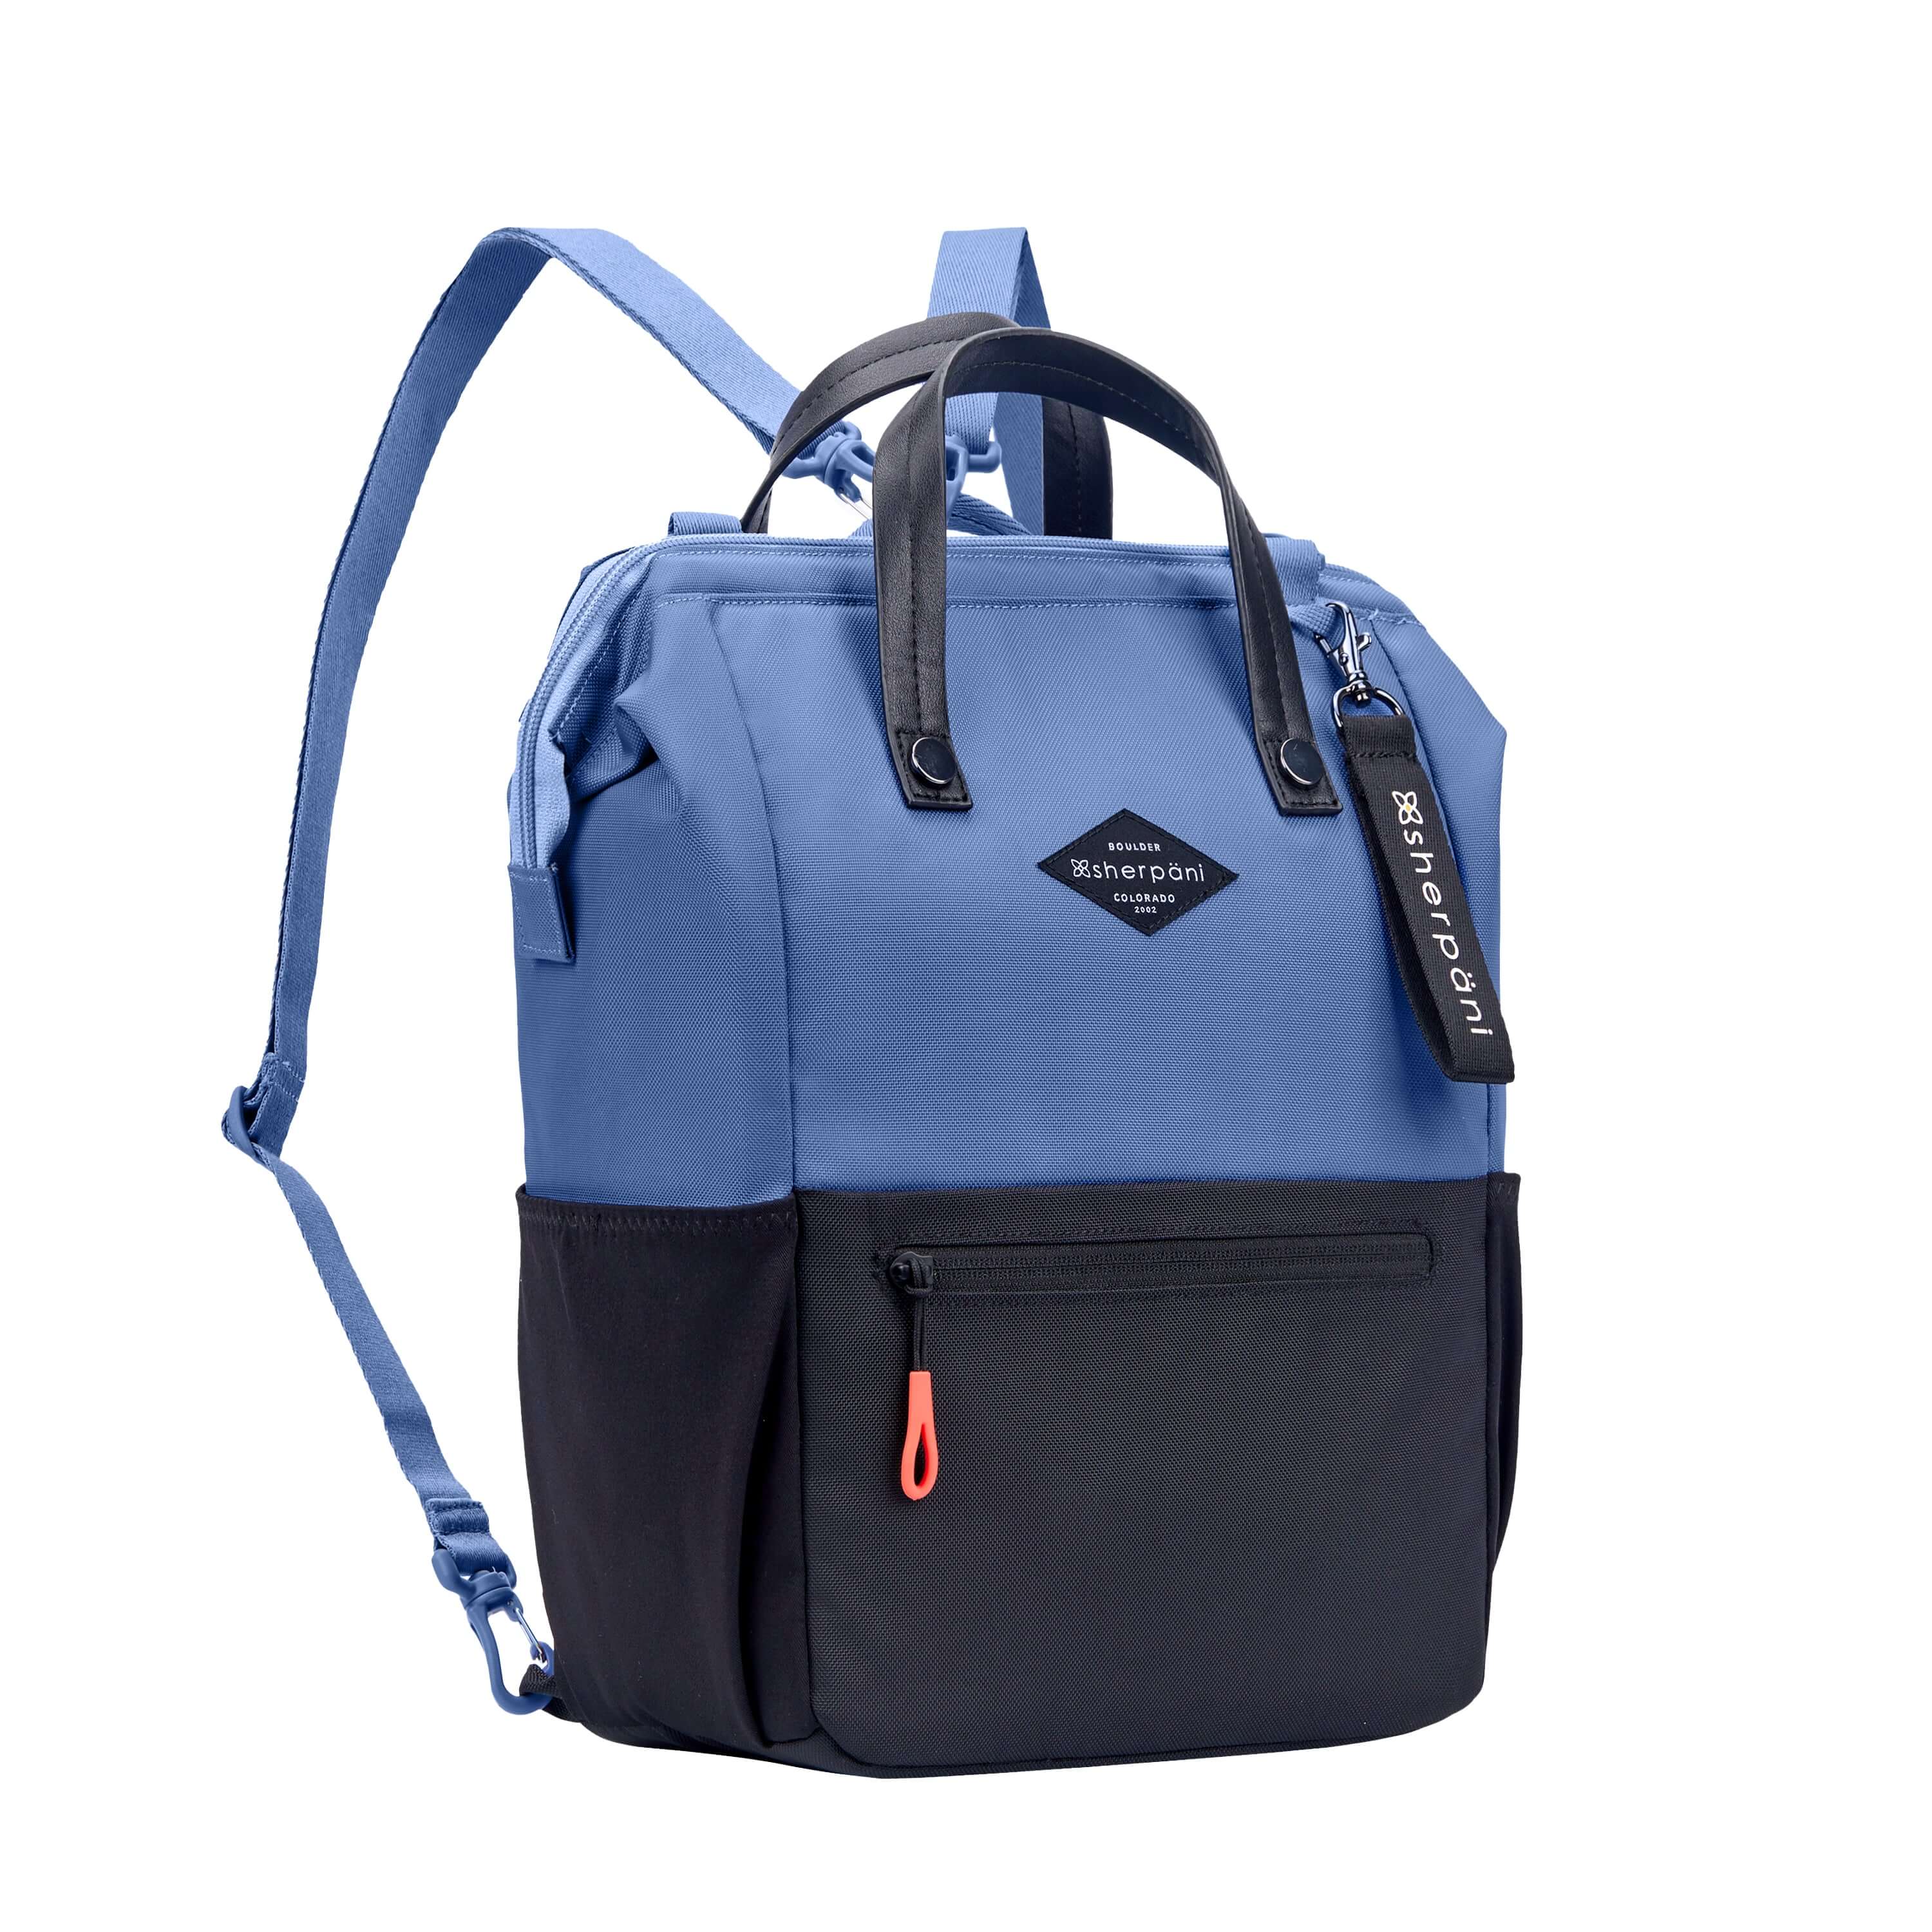 Angled front view of Sherpani three in one bag, the Dispatch in Pacific Blue. The bag is two toned: the top is ocean blue and the bottom is black. There is an external zipper pocket on the front panel. Easy pull zippers are accented in red. A branded Sherpani keychain is clipped to the upper right corner. Elastic water bottle holders sit on either side of the bag. It has short tote handles and adjustable/detachable straps that can function for a backpack or crossbody. 